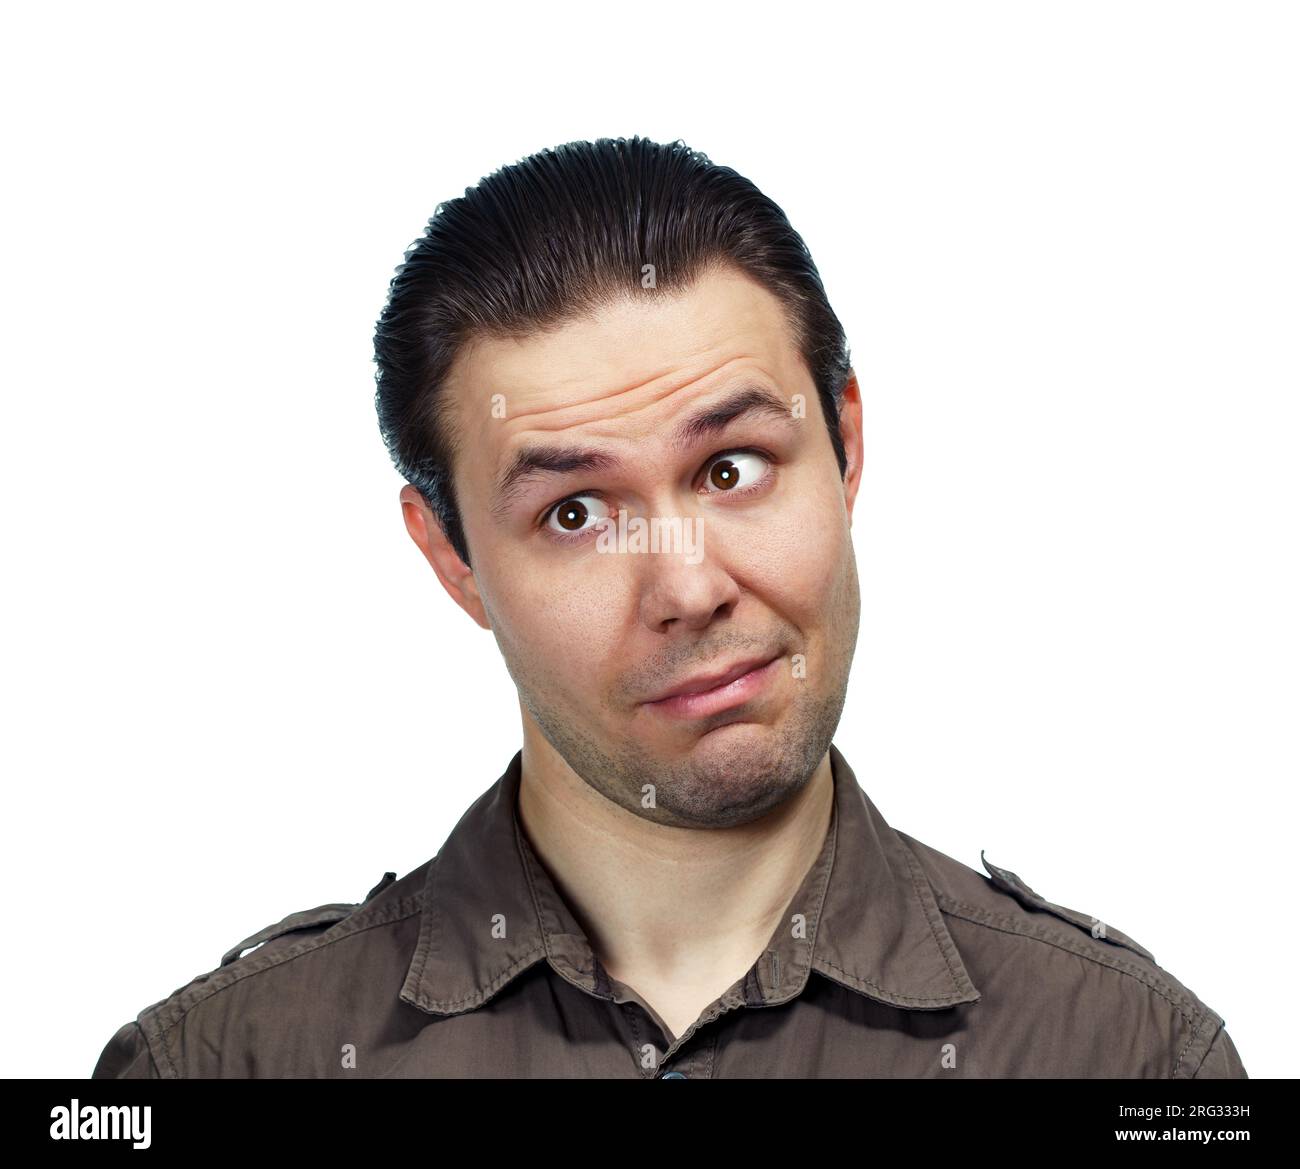 Young surprised man looking aside, emotional portrait on white background Stock Photo